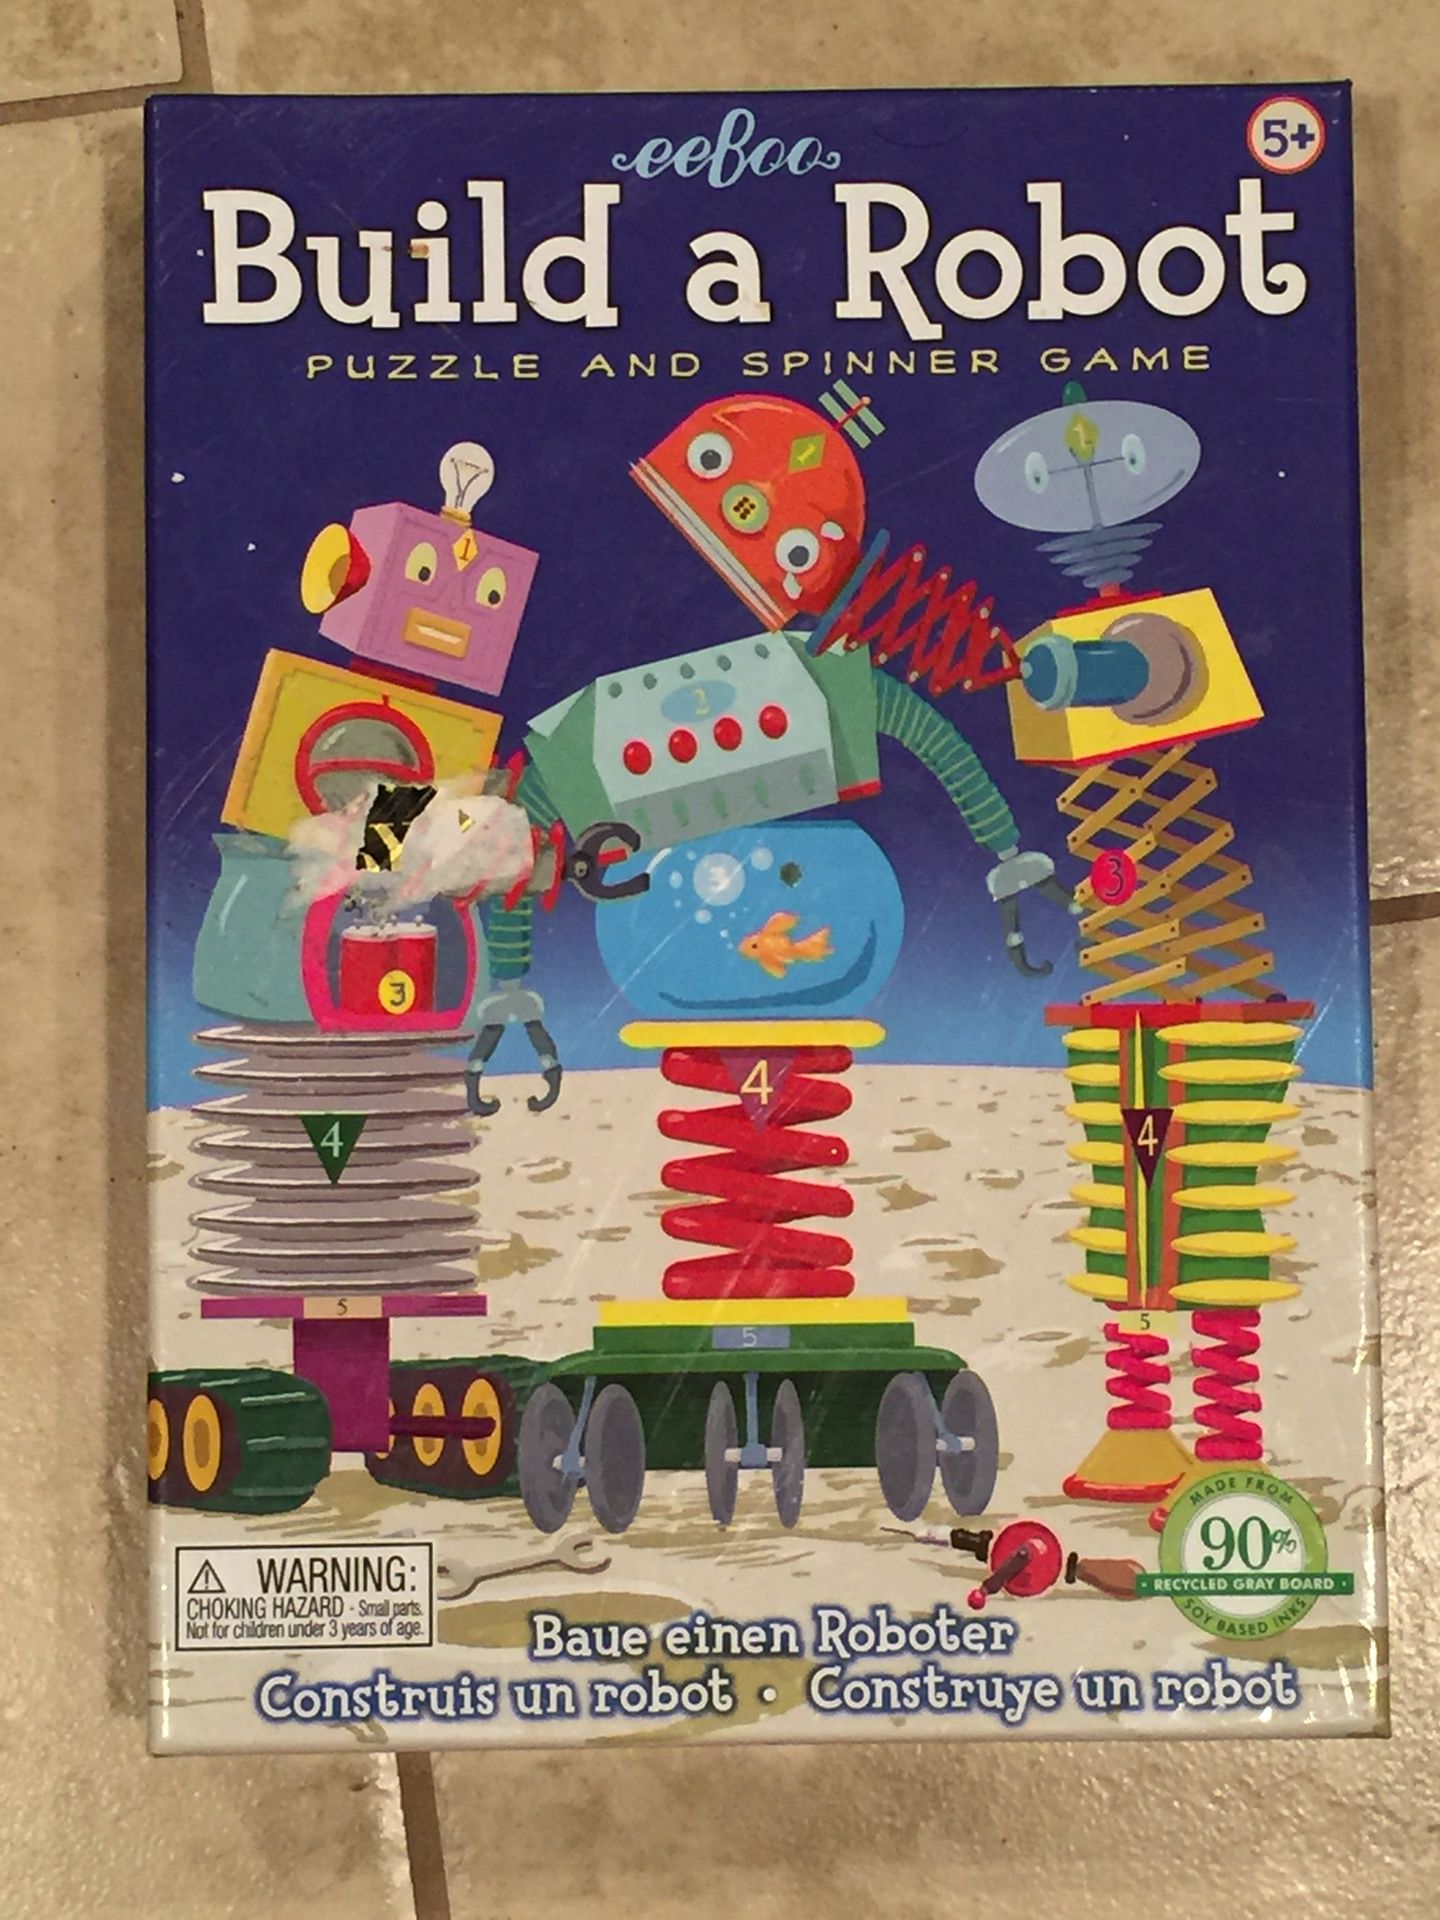 Eeboo build a robot puzzle & spinner game.